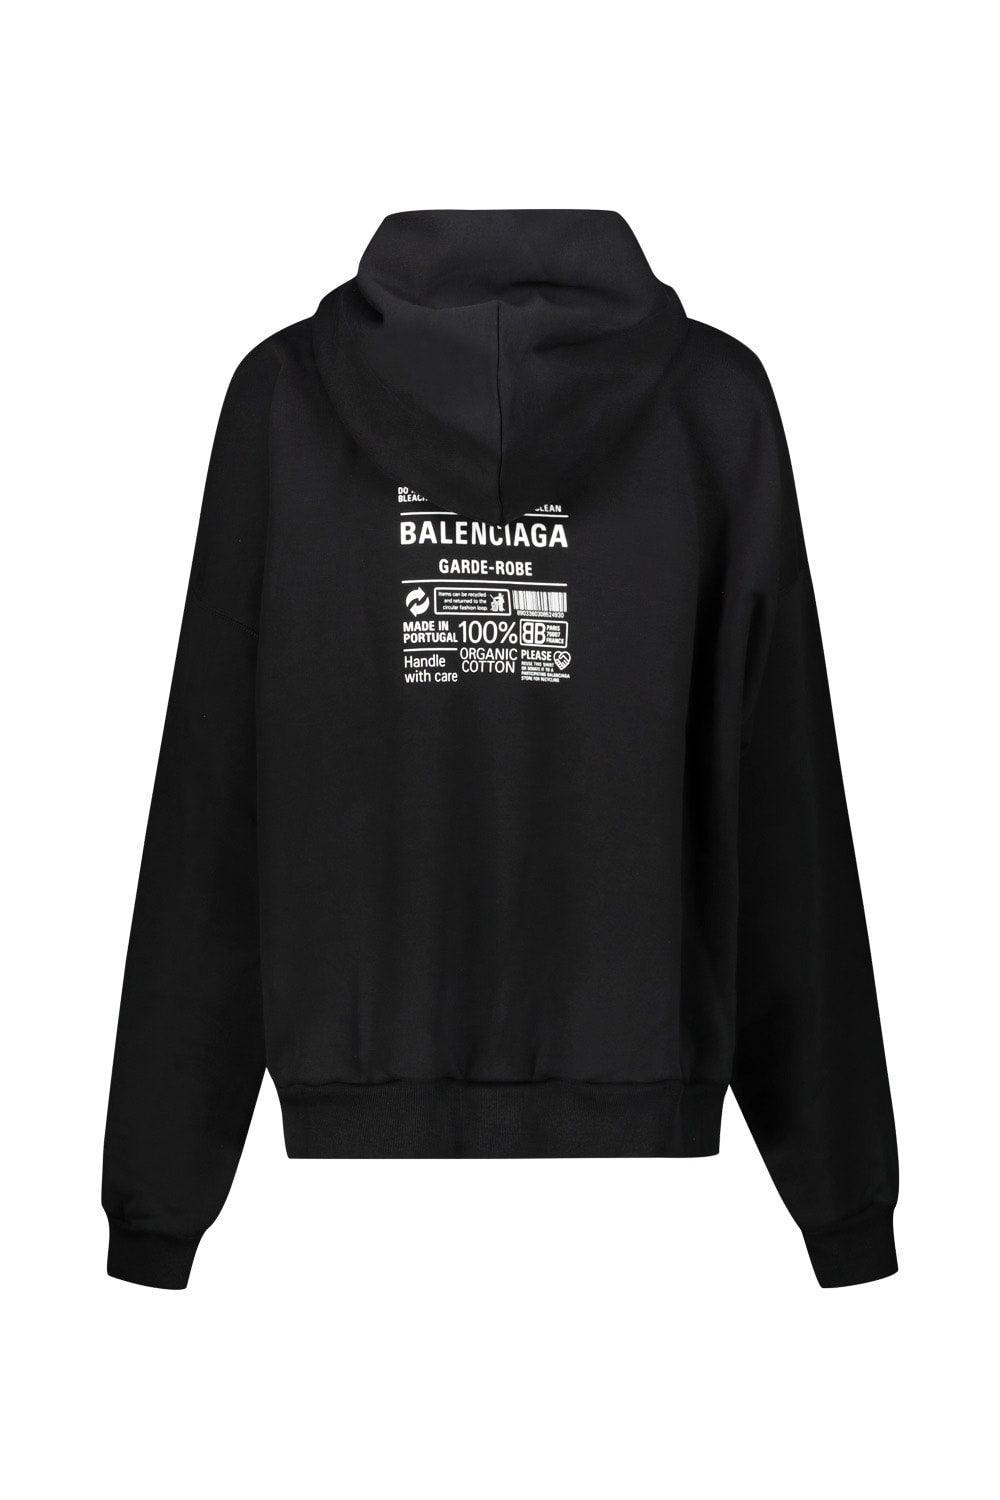 Balenciaga Hoodie With Print On The Back in Black | Lyst